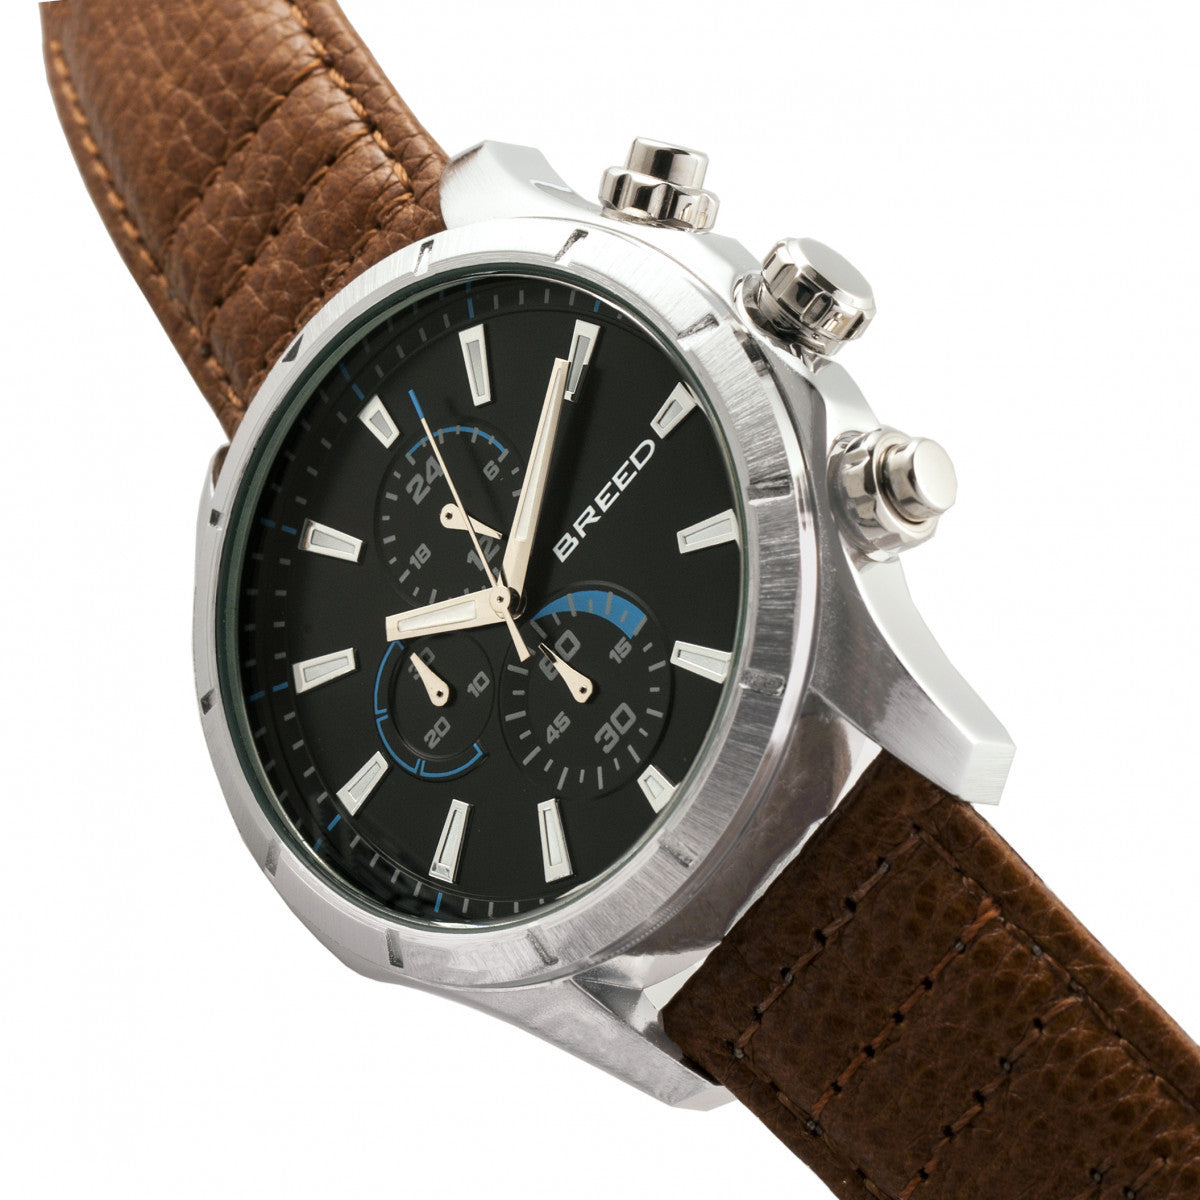 Breed Lacroix Chronograph Leather-Band Watch - Silver/Brown - BRD6802